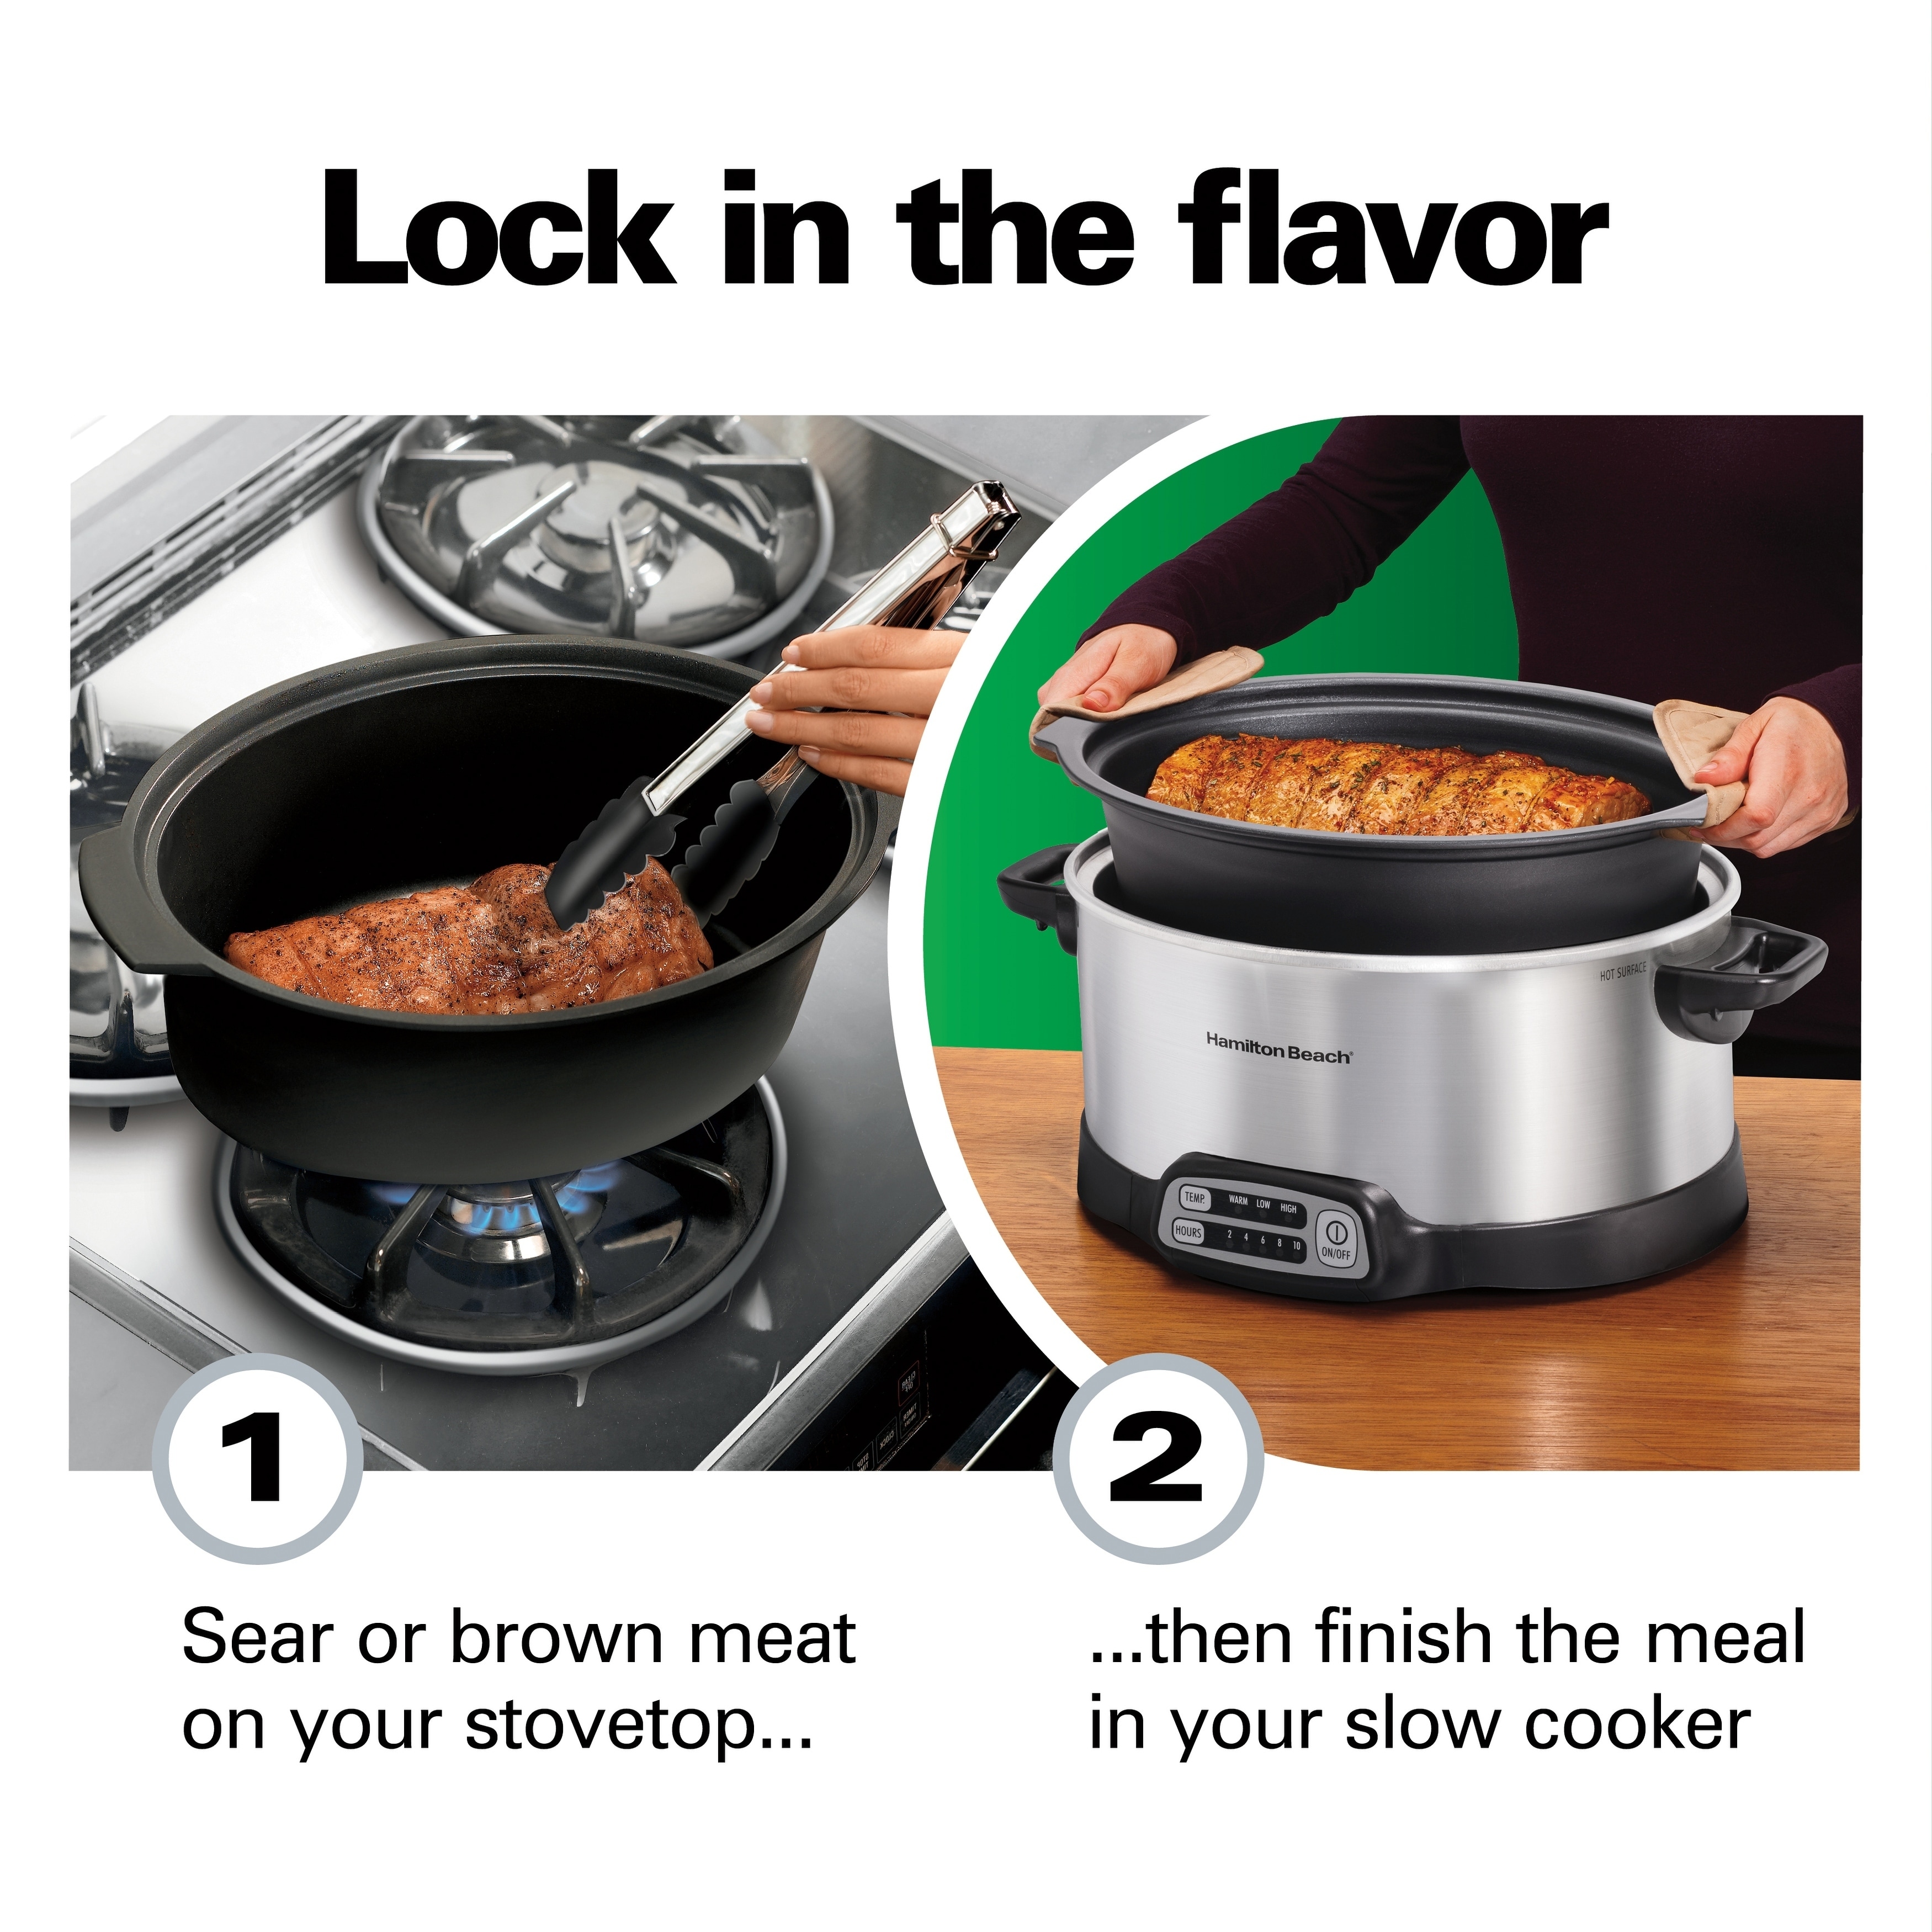 https://ak1.ostkcdn.com/images/products/28958258/Stovetop-Sear-Cook-6-QT-Slow-Cooker-1de4c5a9-168c-4b88-a83f-b0e5cc6f3144.jpg